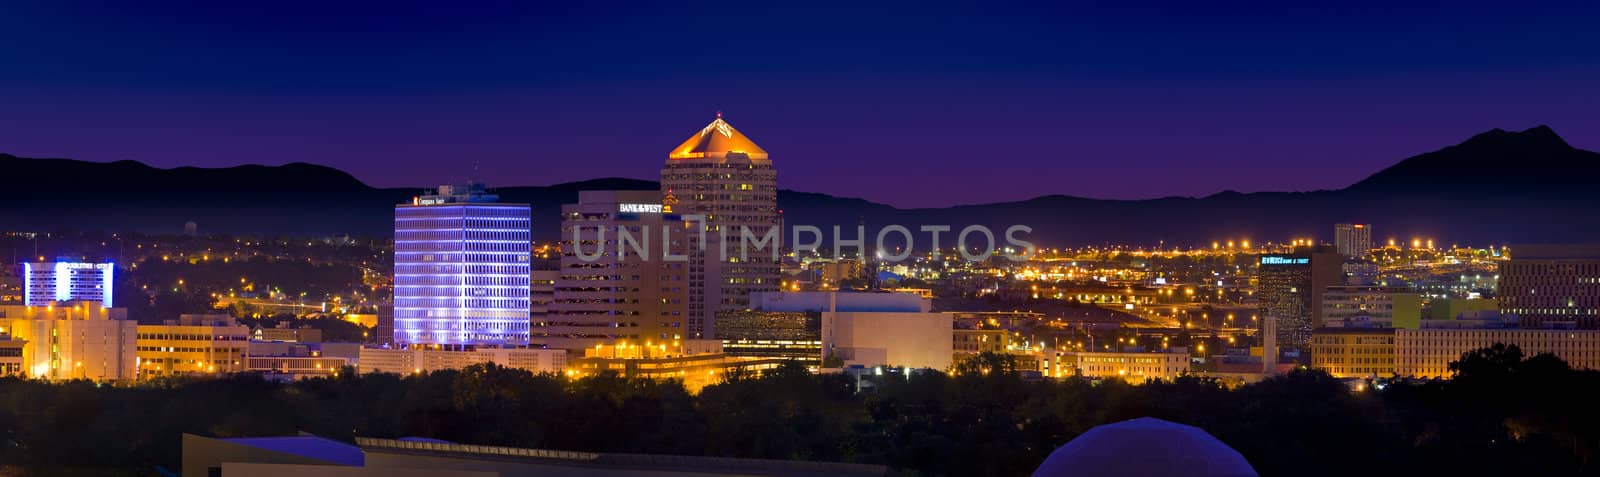 PANORAMIC DUSK NIGHT PICTURE OF DOWNTOWN ALBUQUERQUE NEW MEXICO by hotflash2001